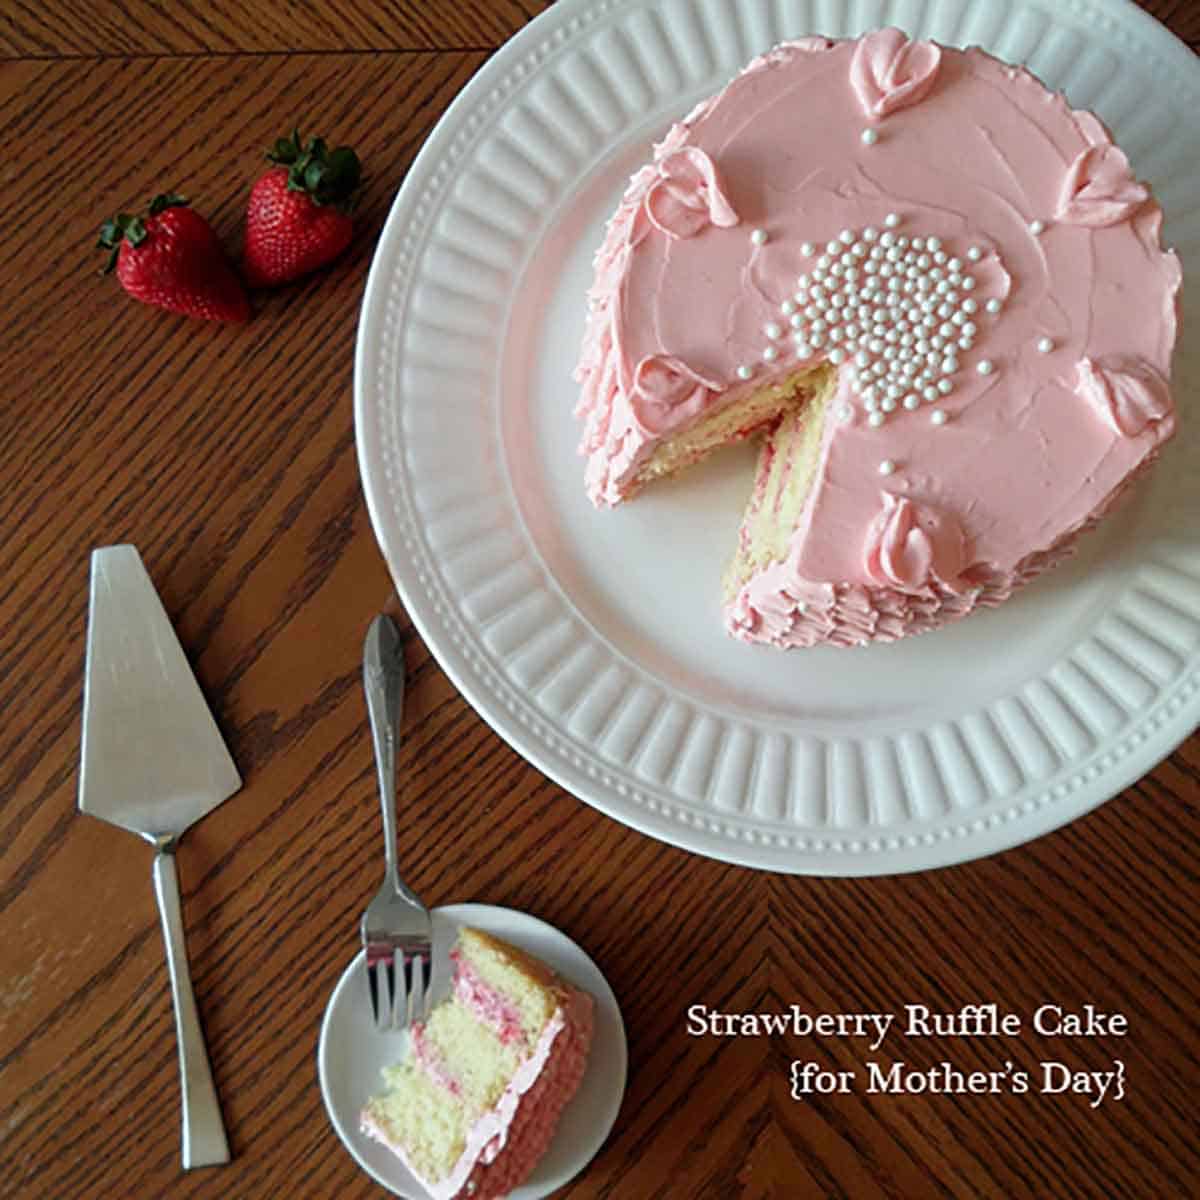 Easy Strawberry Almond Cake with Whipped Cream Frosting